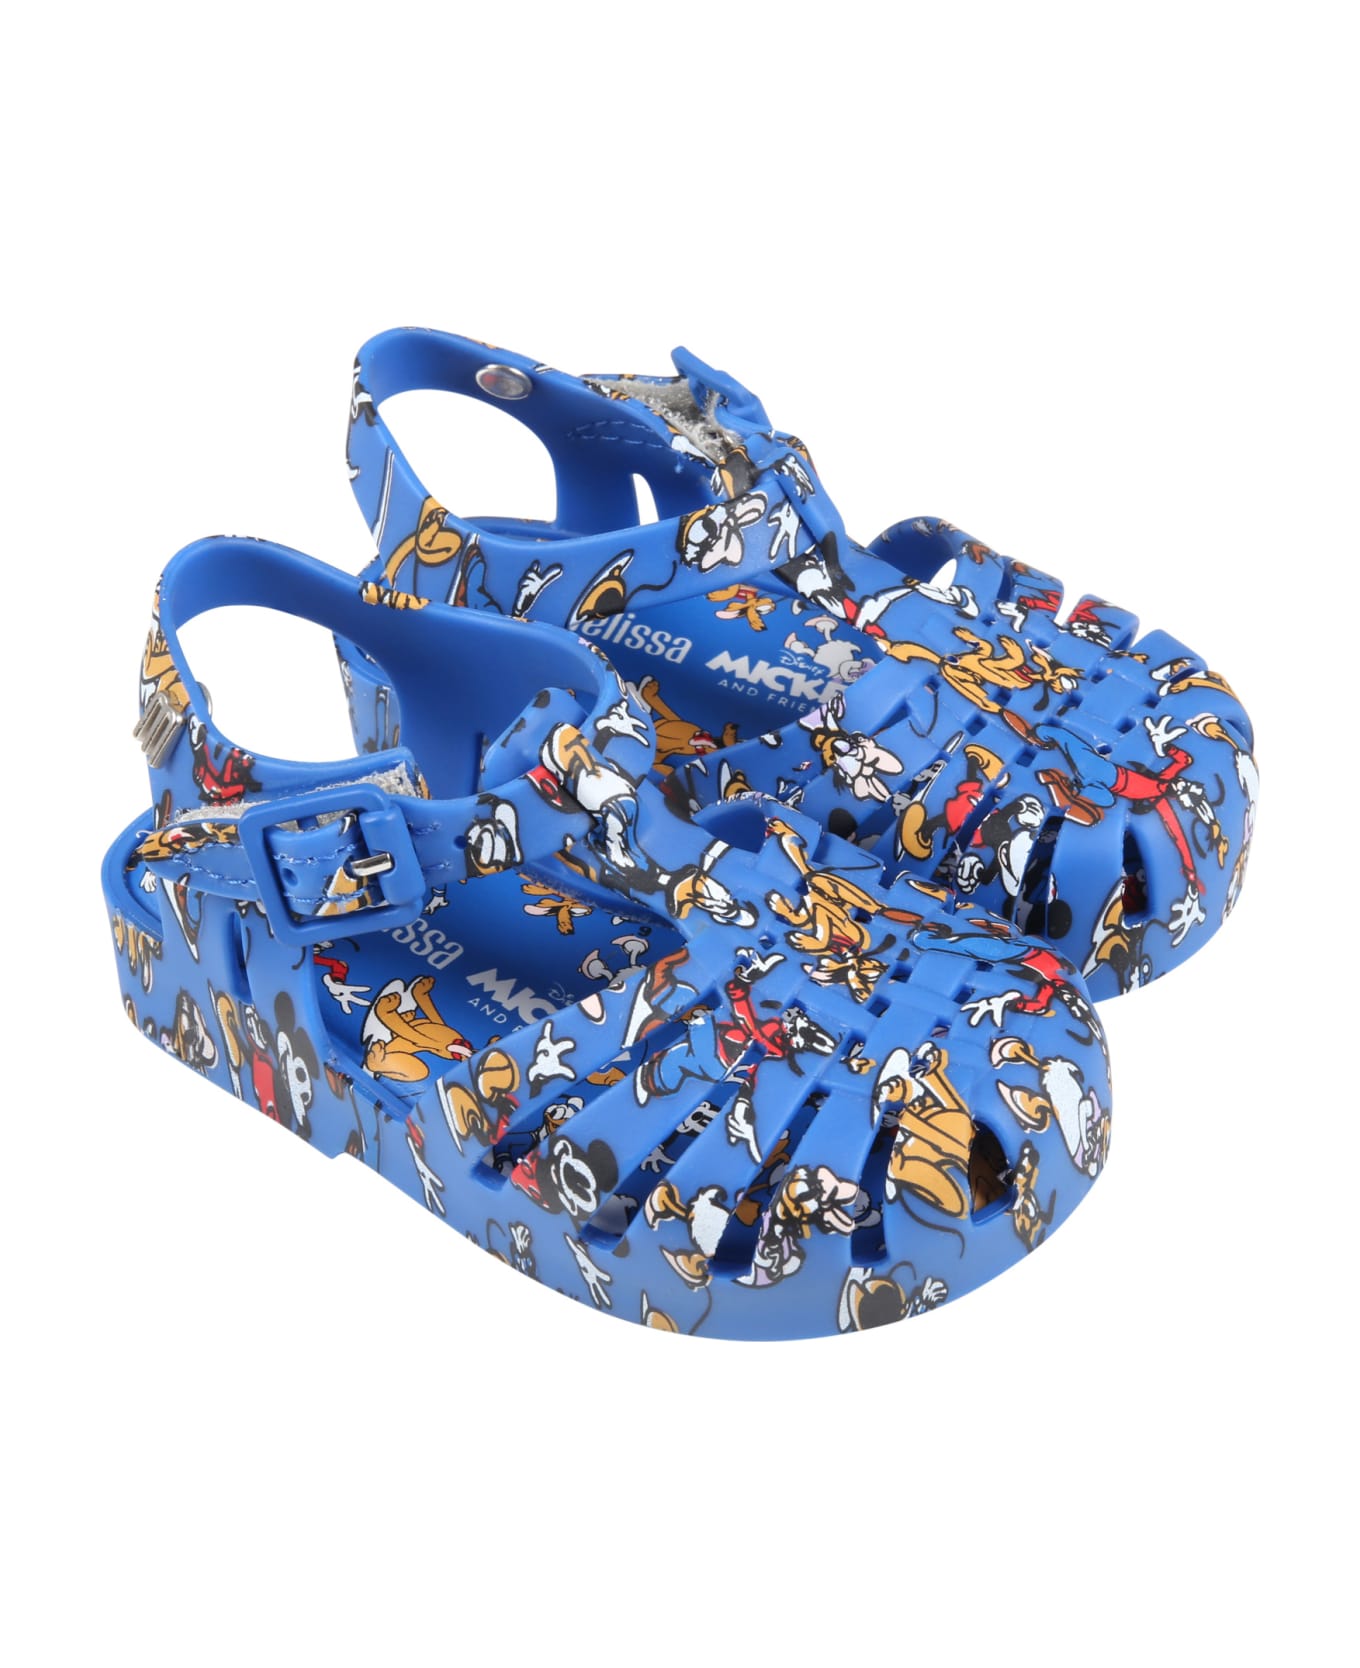 Melissa Blue Sandals For Boy With Disney Characters - Blue シューズ